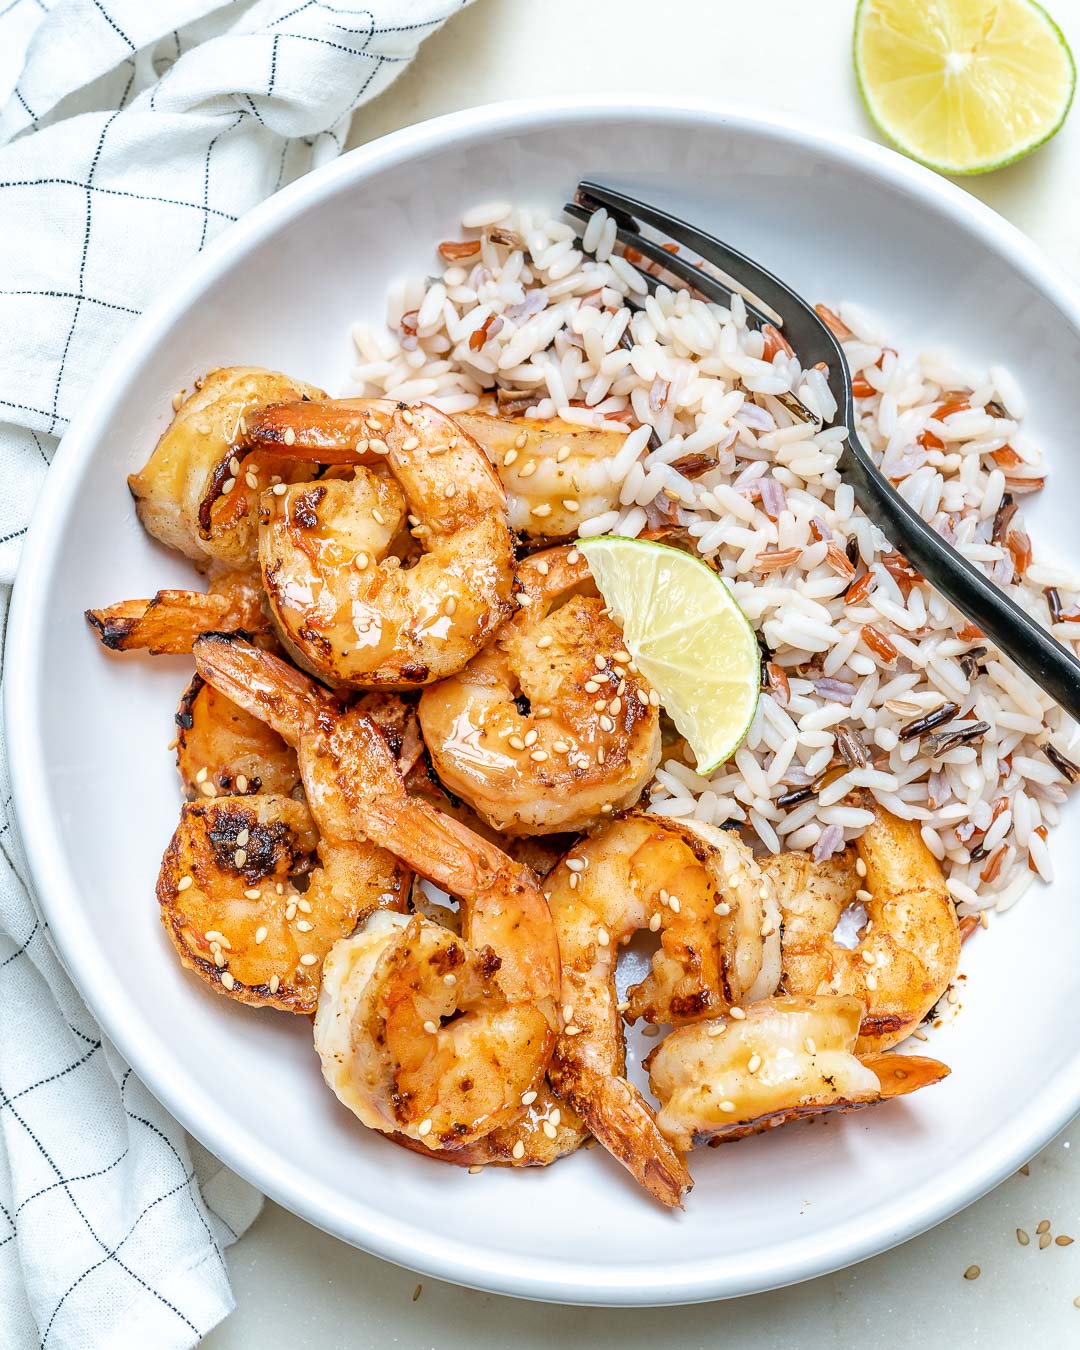 Ginger + Miso + Lime Shrimp for Easy and Delicious Clean Eats!